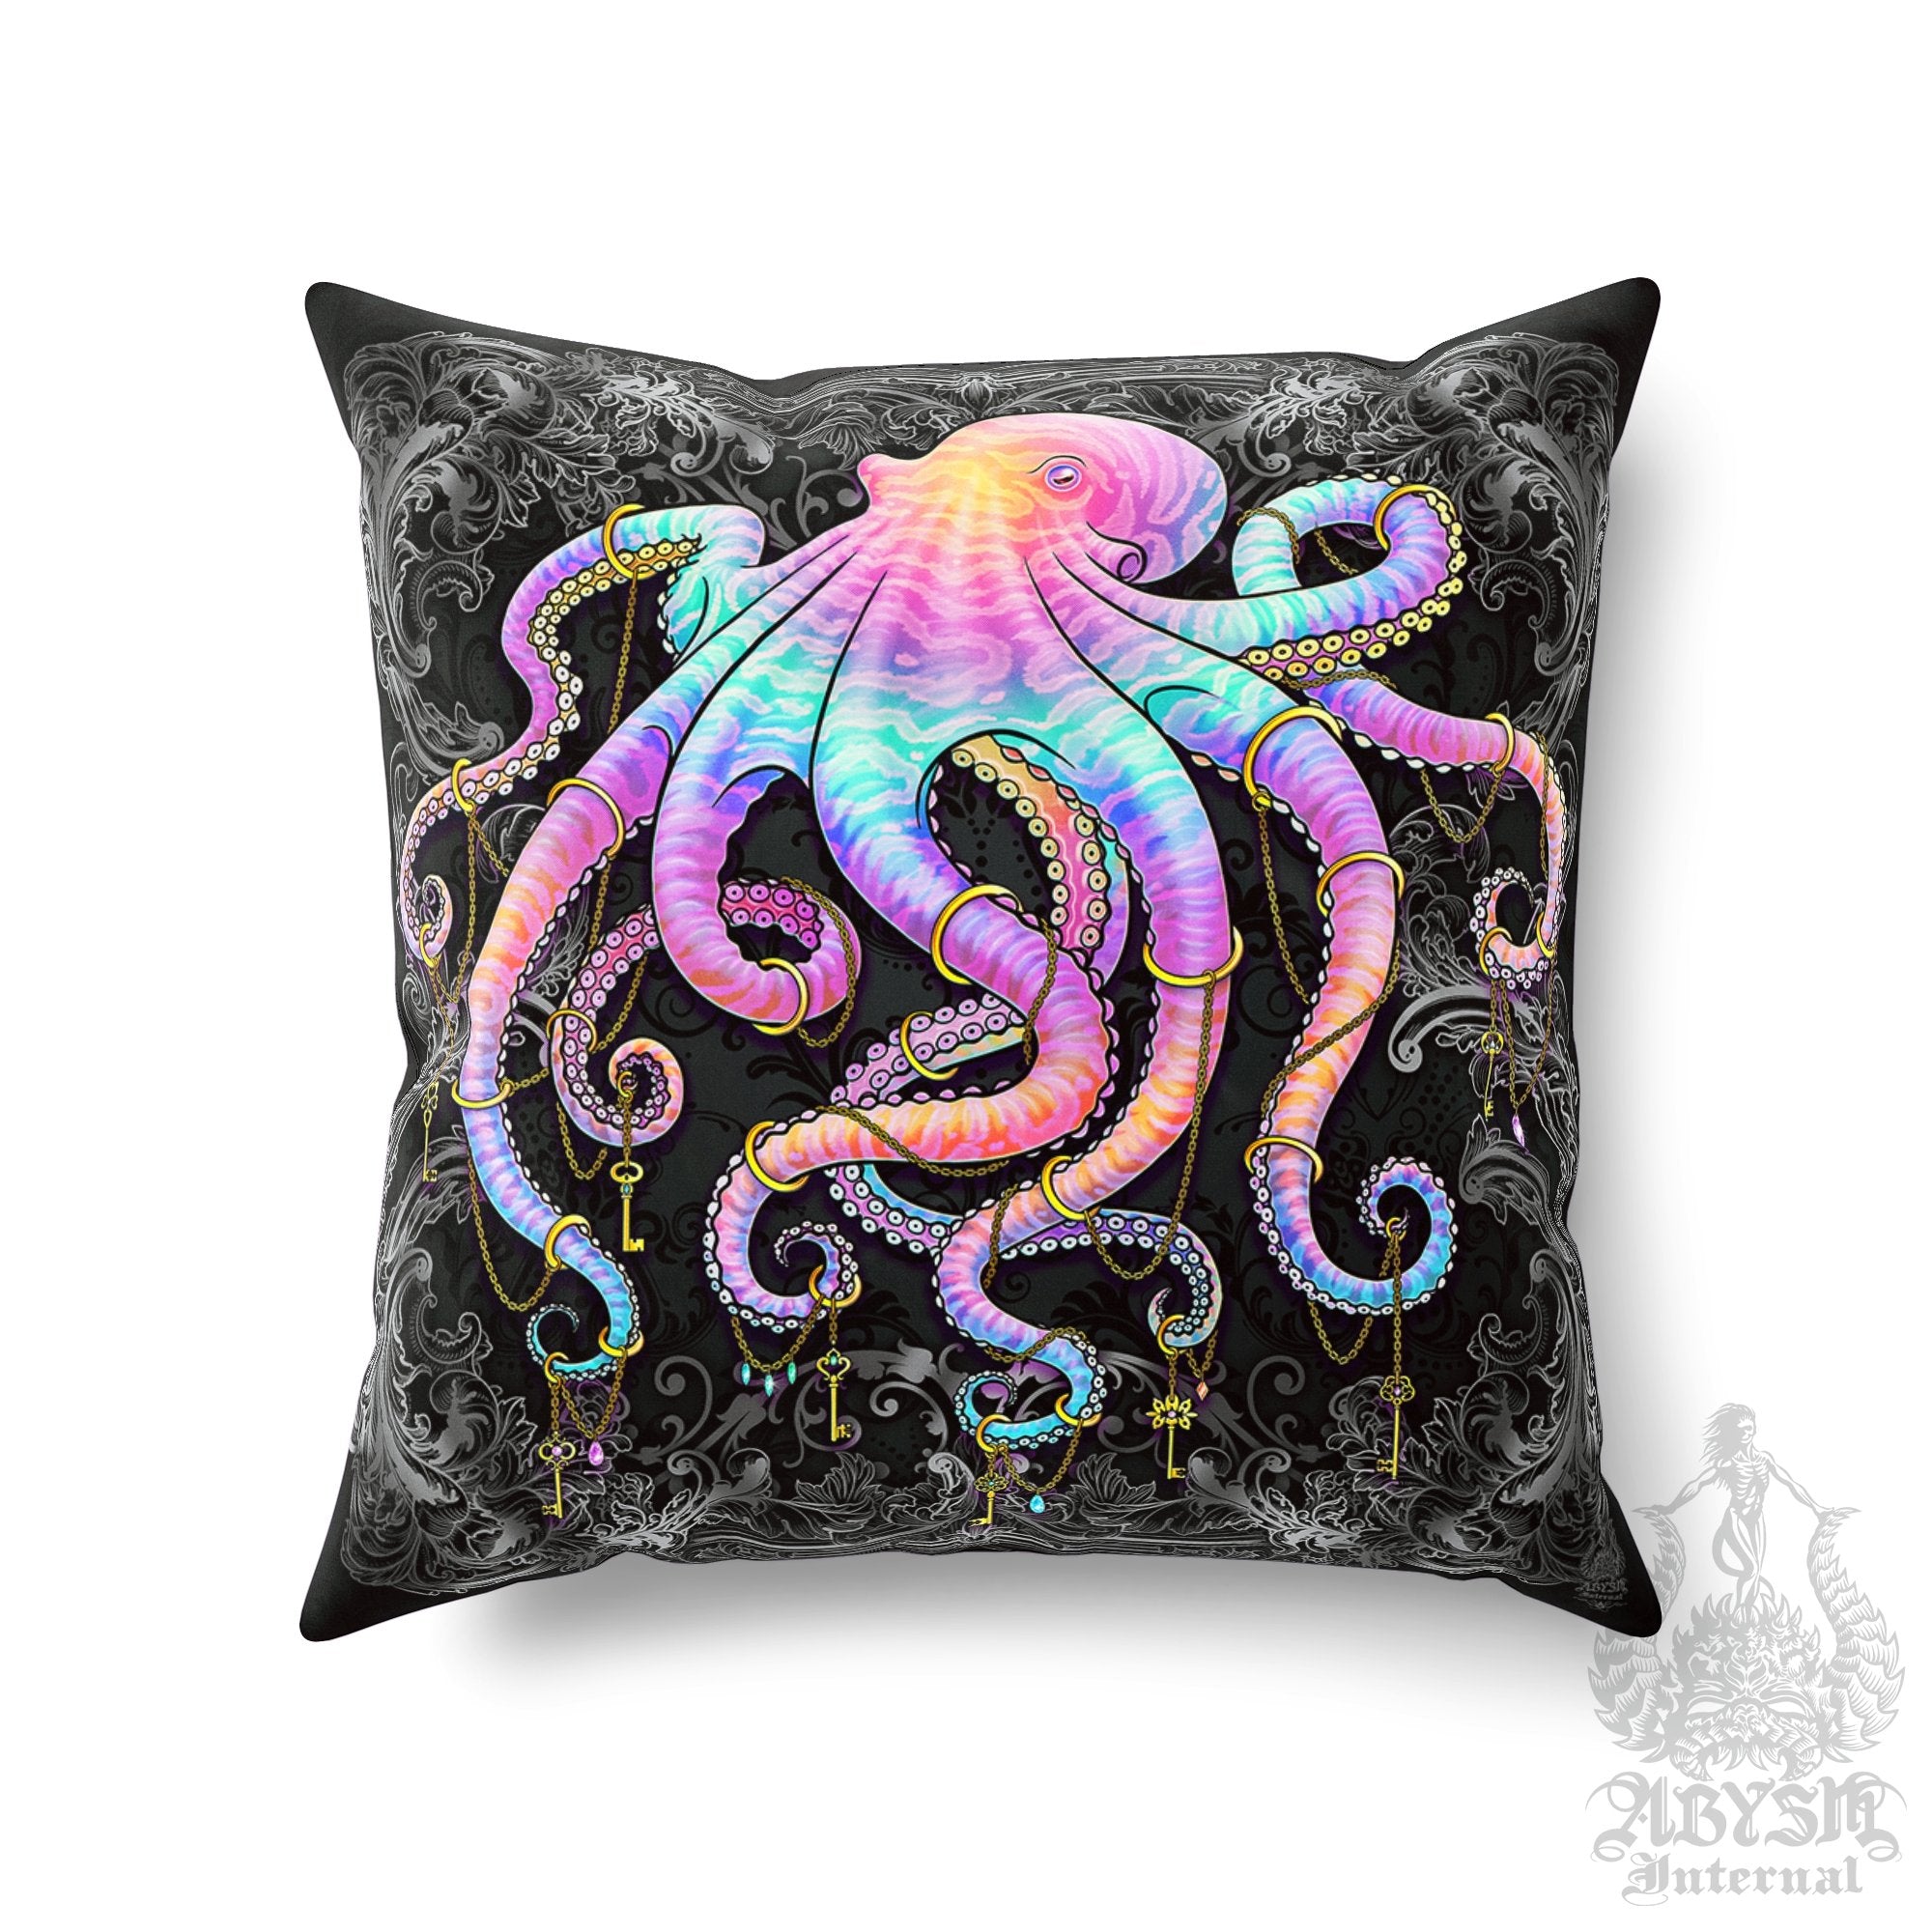 Indie Throw Pillow, Decorative Accent Cushion, Eclectic Beach Decor, Funky Home - Dark Pastel Punk Octopus - Abysm Internal